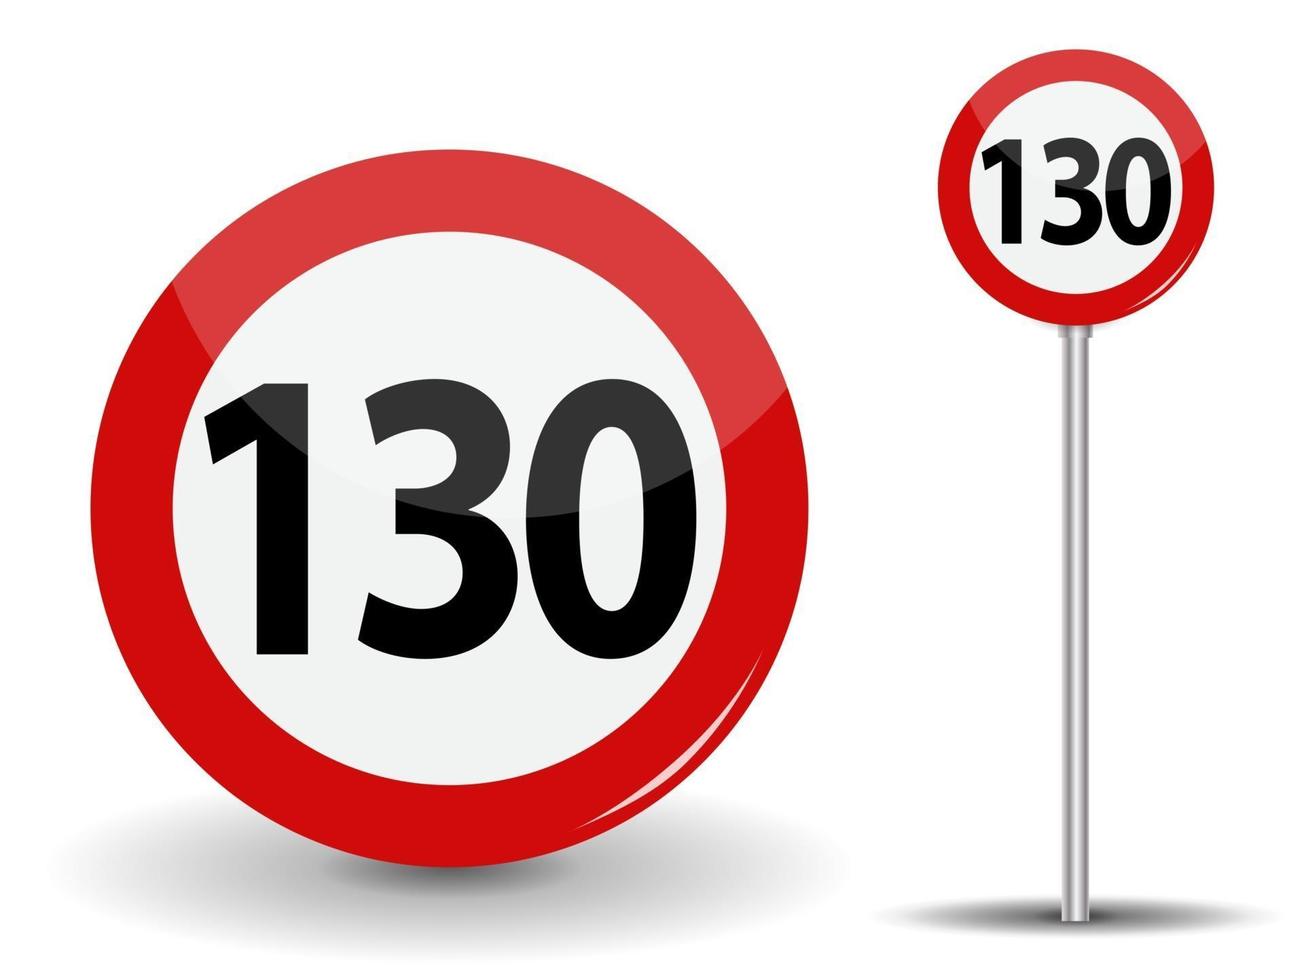 Round Red Road Sign Speed limit 130 kilometers per hour vector